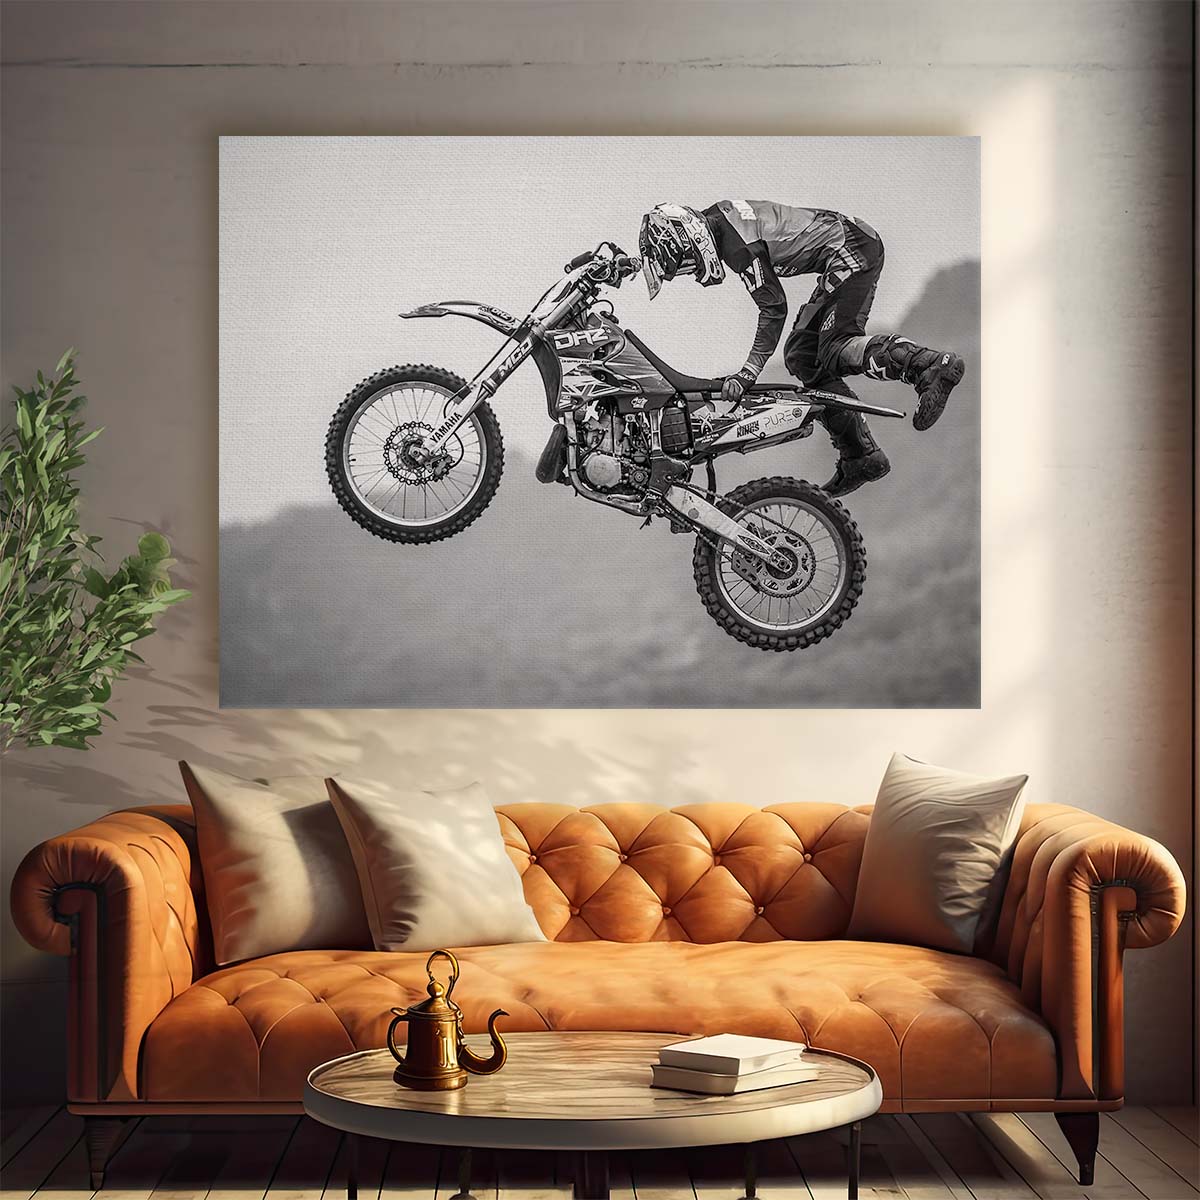 Motocross Stunt Leap Black and White Photography - Action Art Wall Art